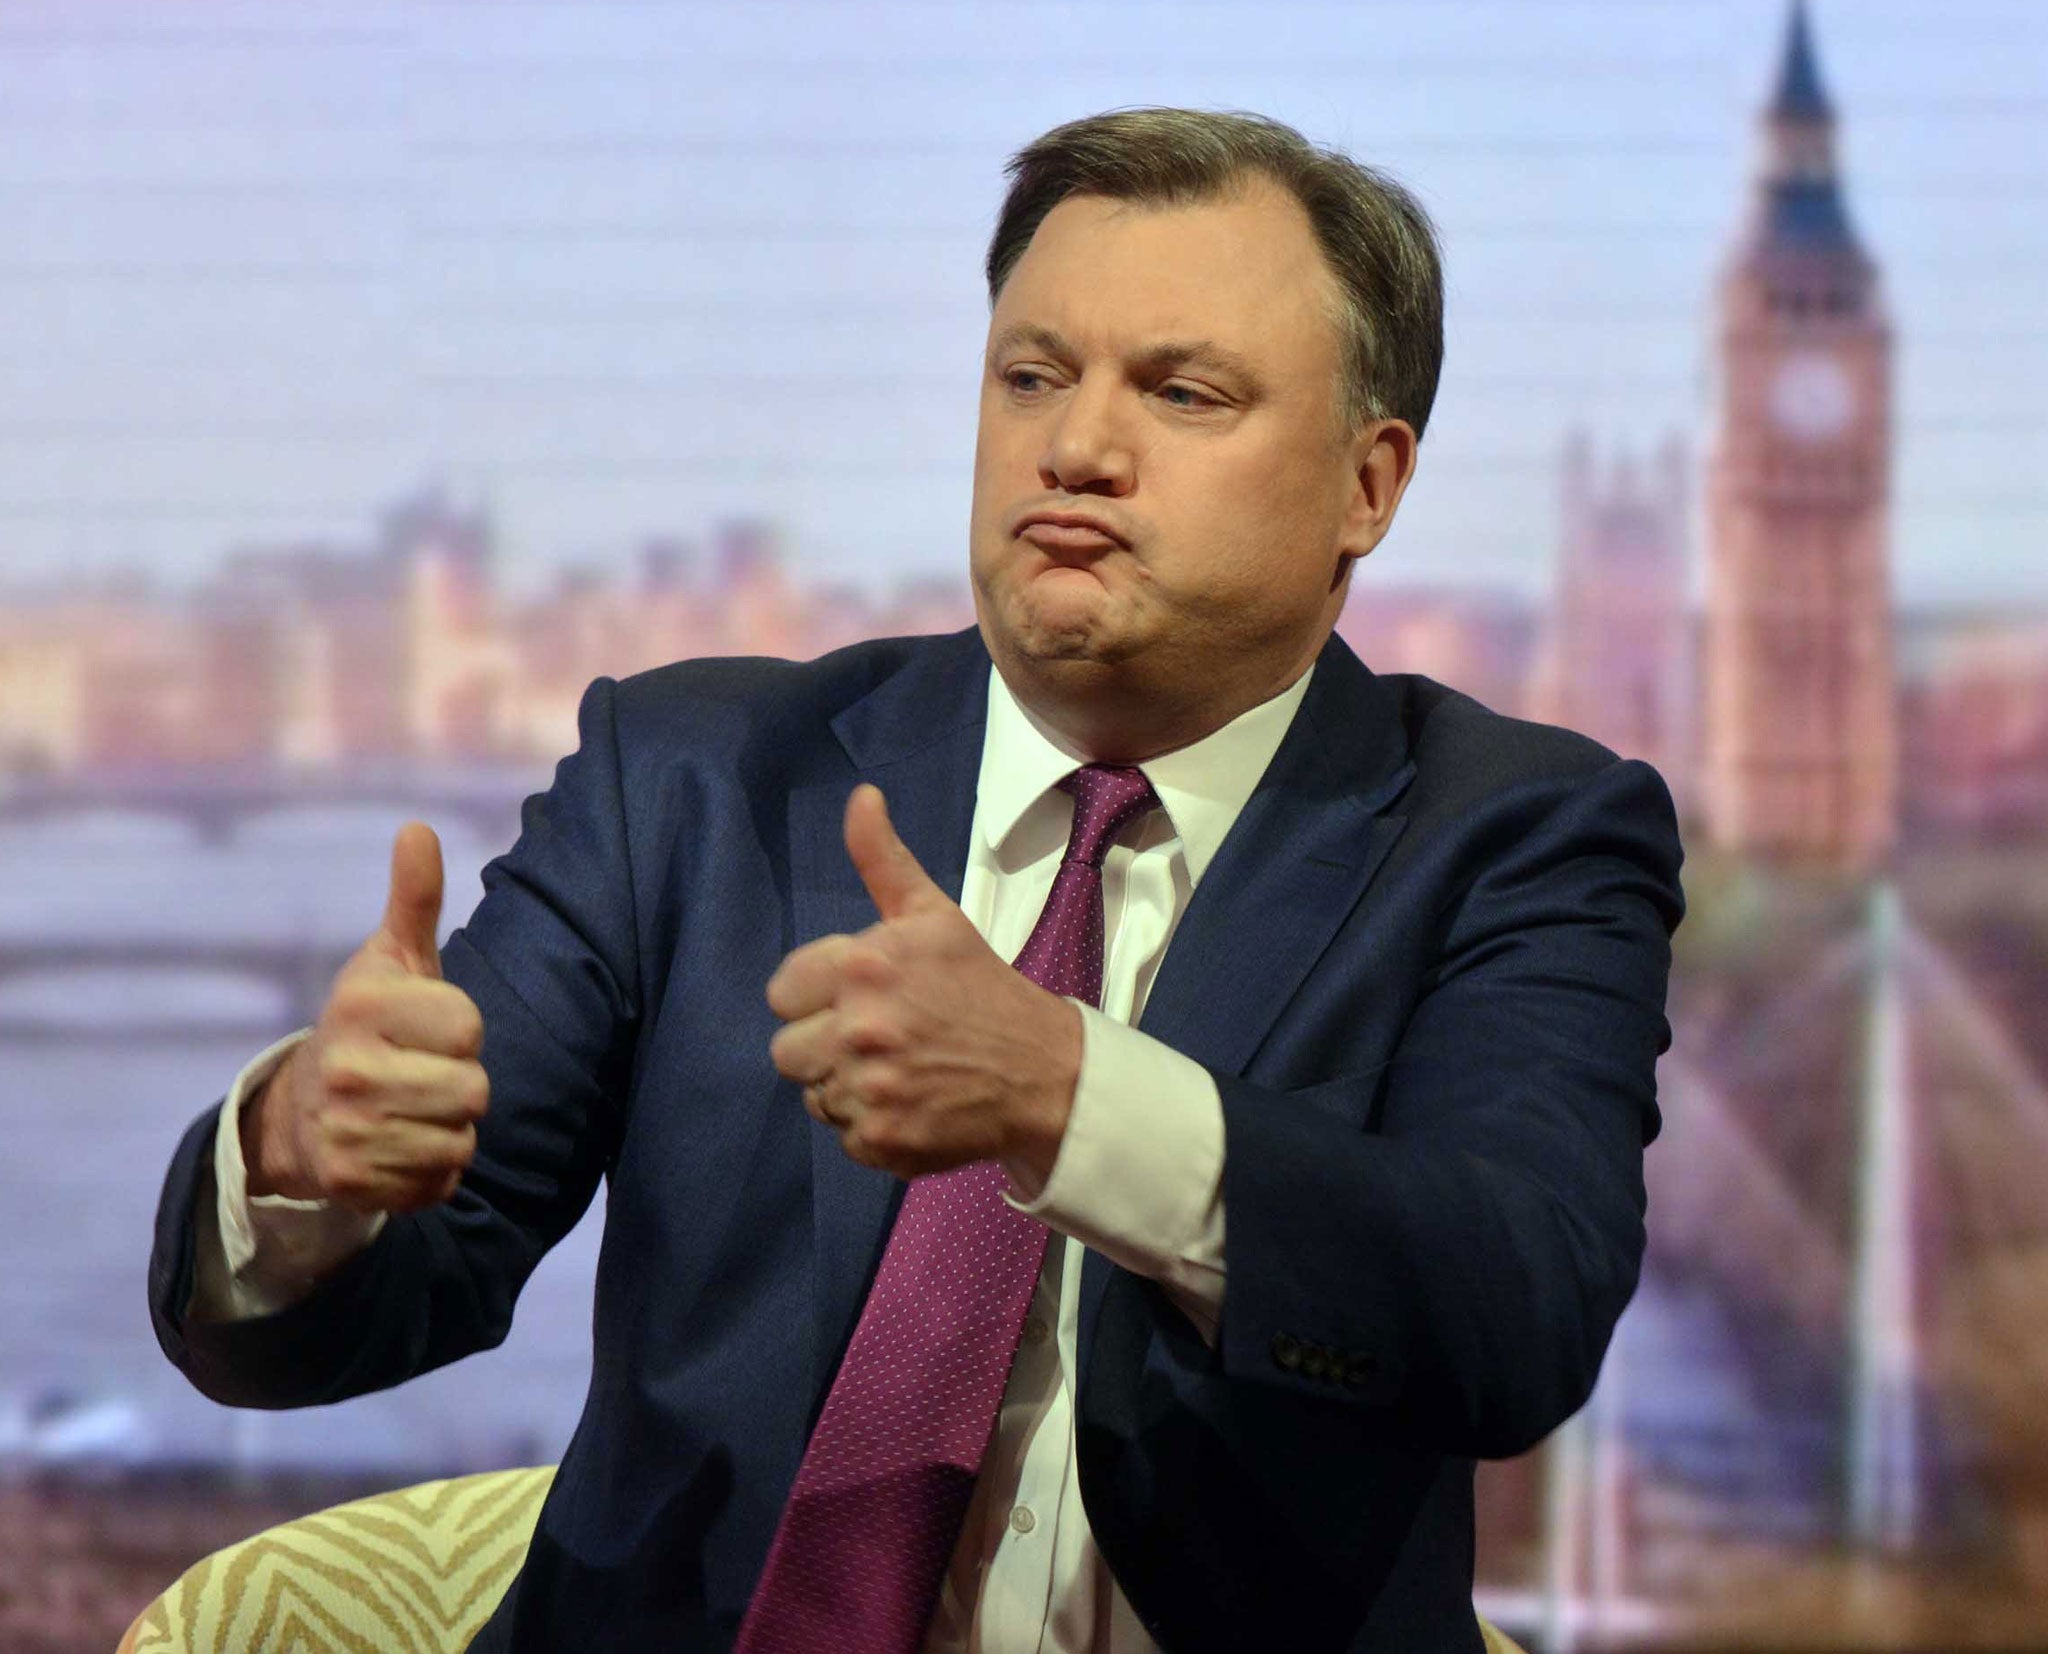 Ed Balls ruled out scrapping the non-dom tax status in January